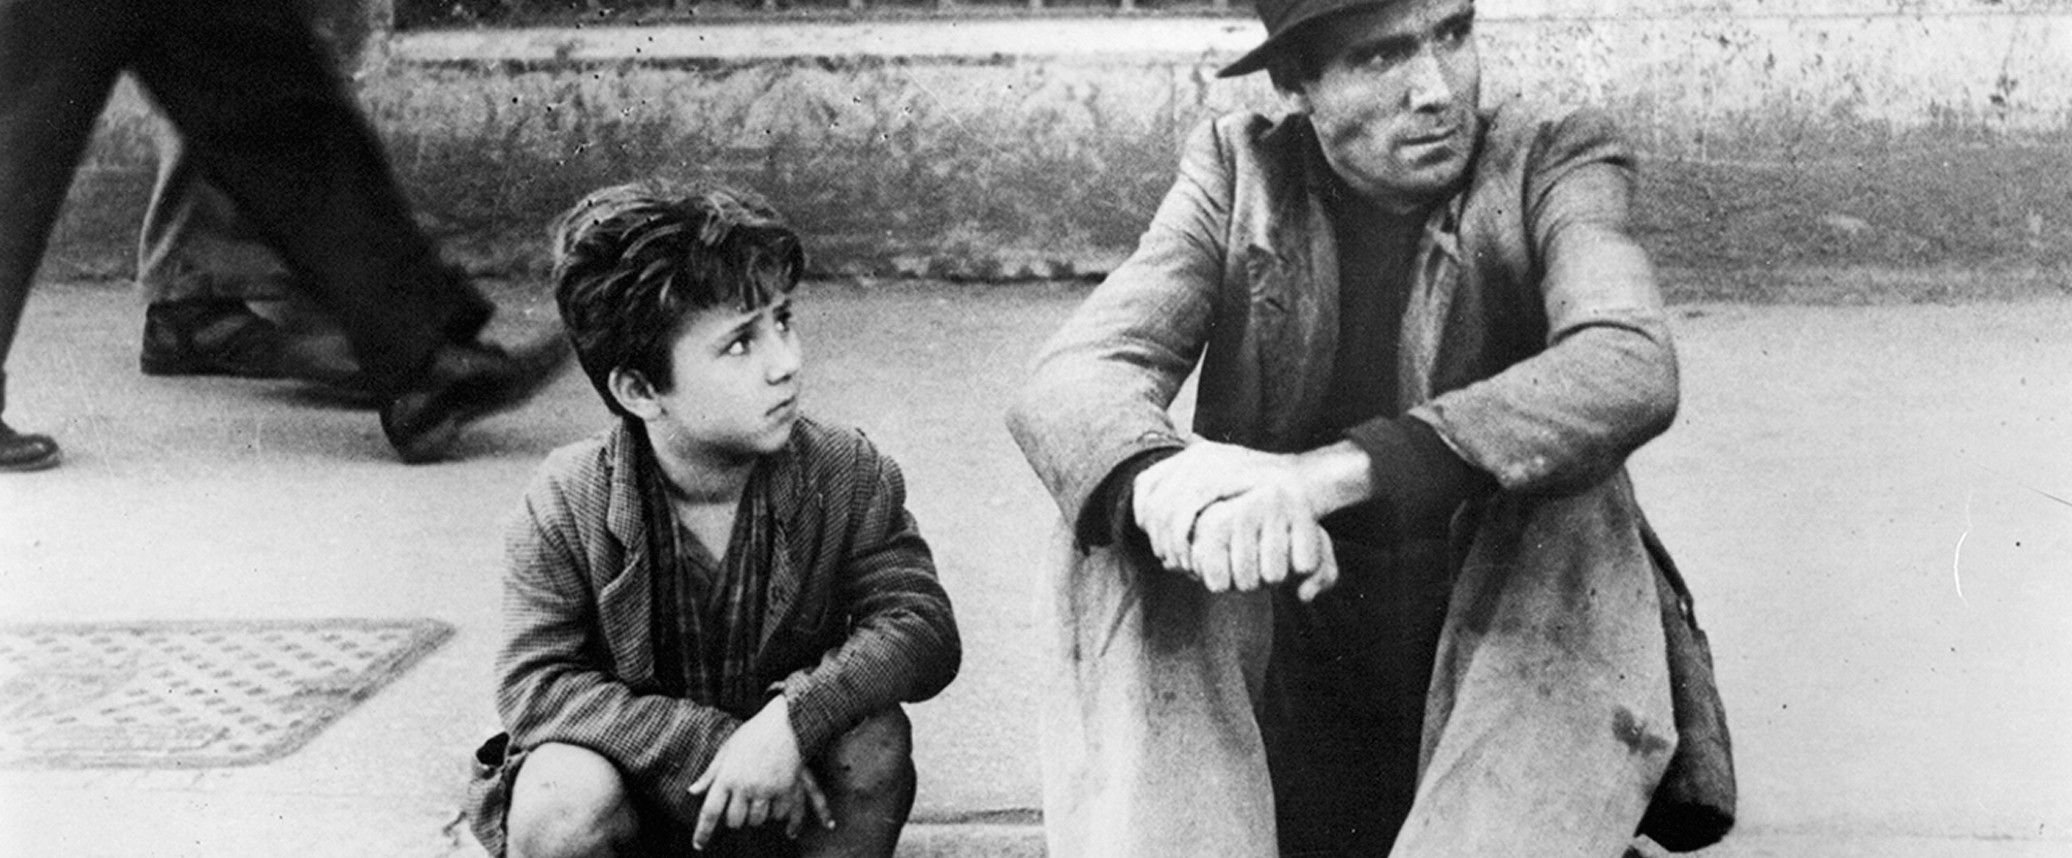 Watch: How Italian Neorealism Brought the Grit of the Streets to the Big Screen